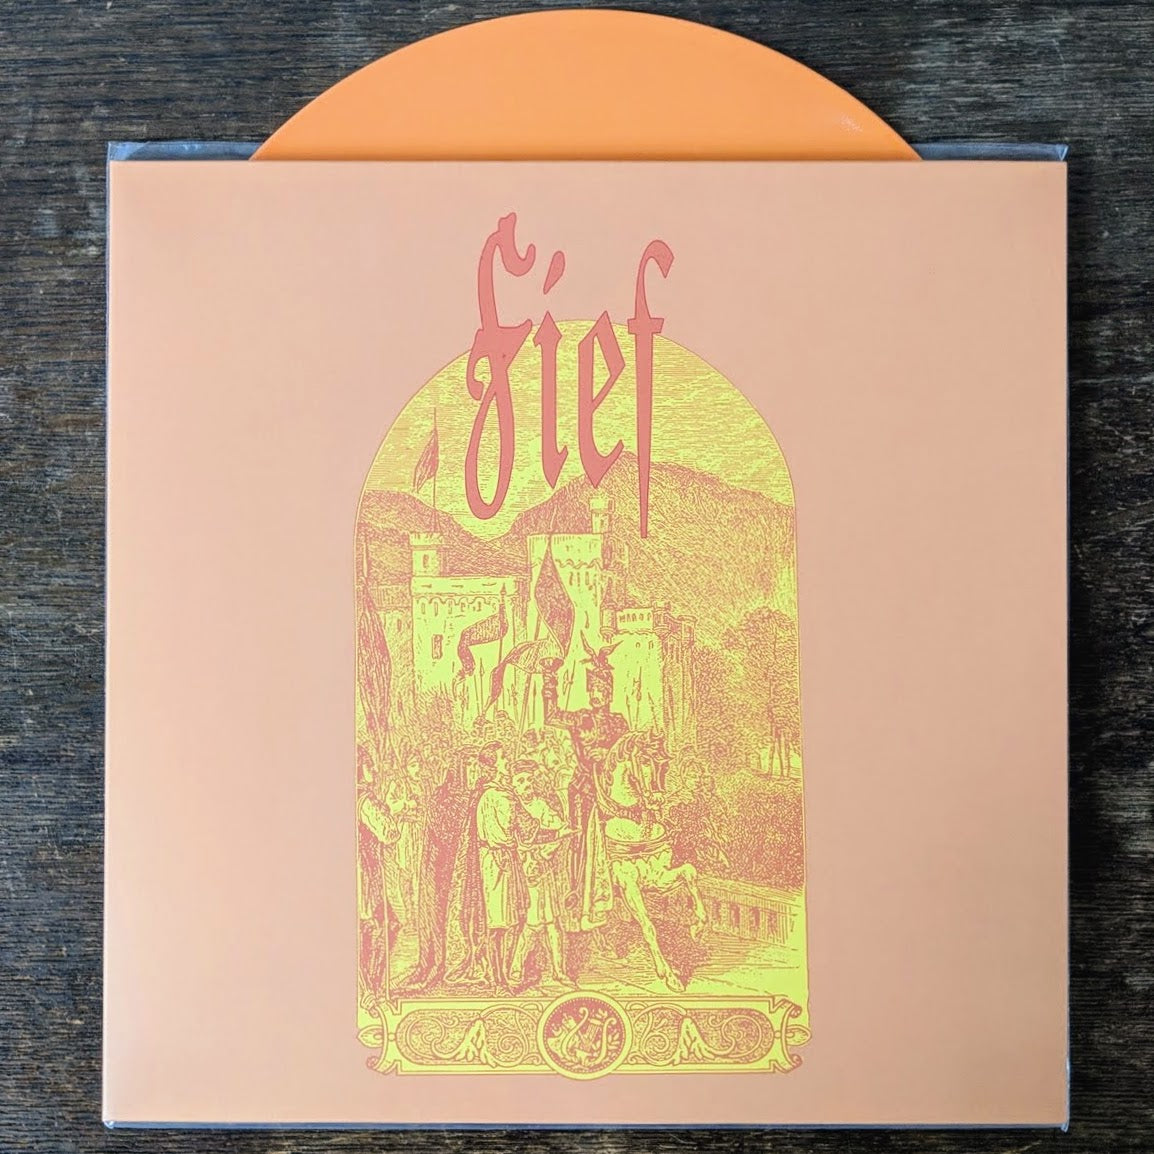 [SOLD OUT] FIEF "I+II" 2xLP Deluxe Set w/ Slipcover (#/100)